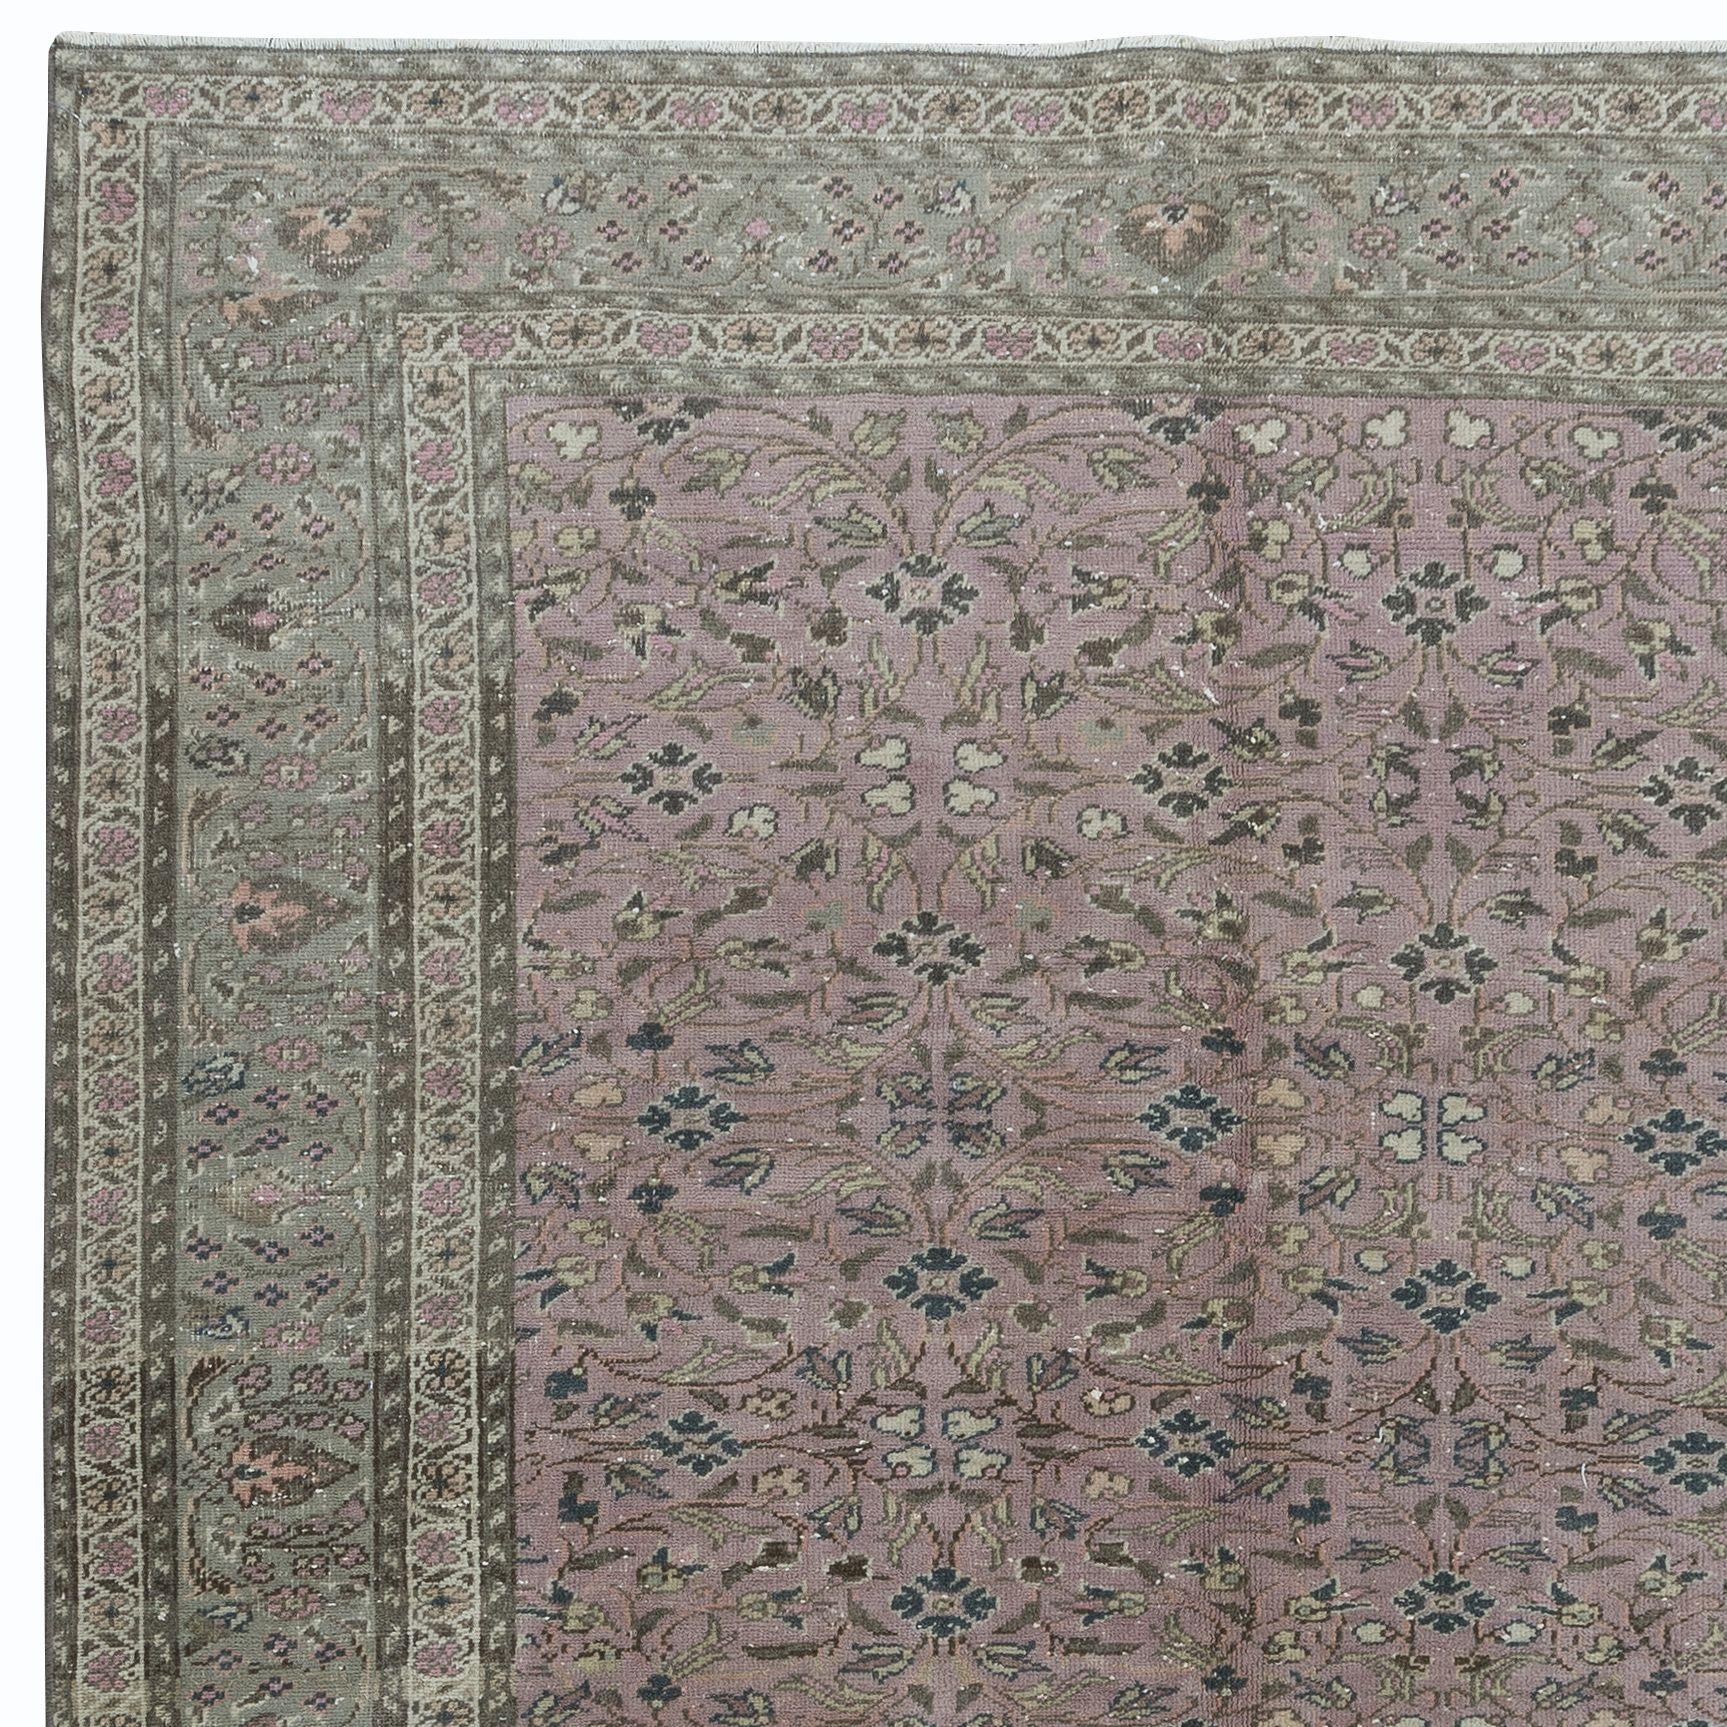 Hand-Woven 5.5x8.2 Ft Traditional Vintage Handmade Turkish Area Rug with Floral Design For Sale